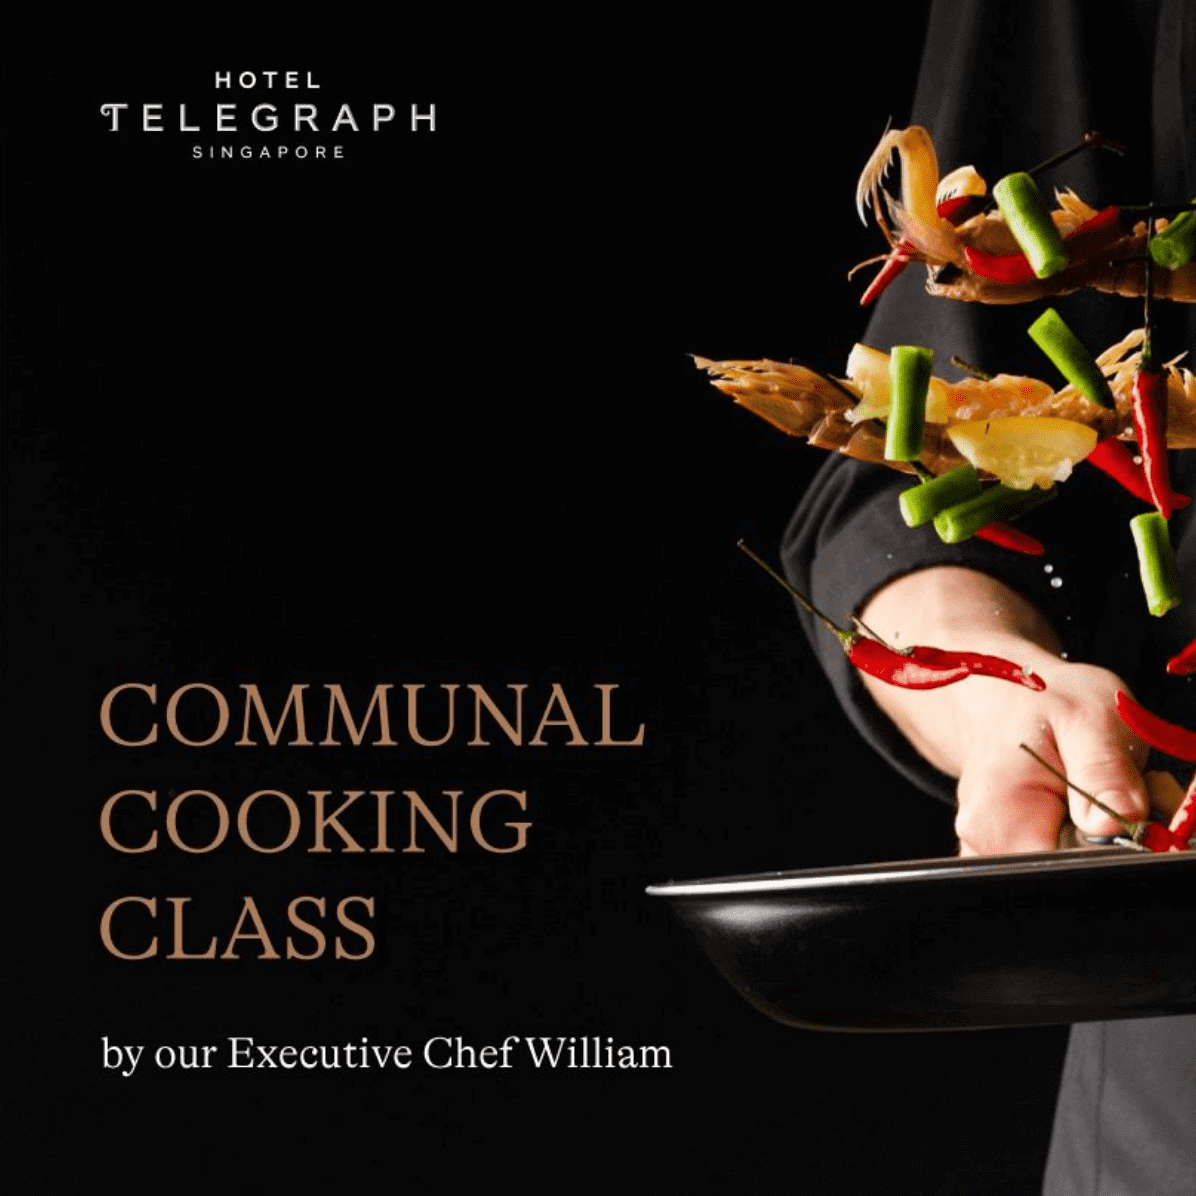 Communal Cooking Class at Hotel Telegraph